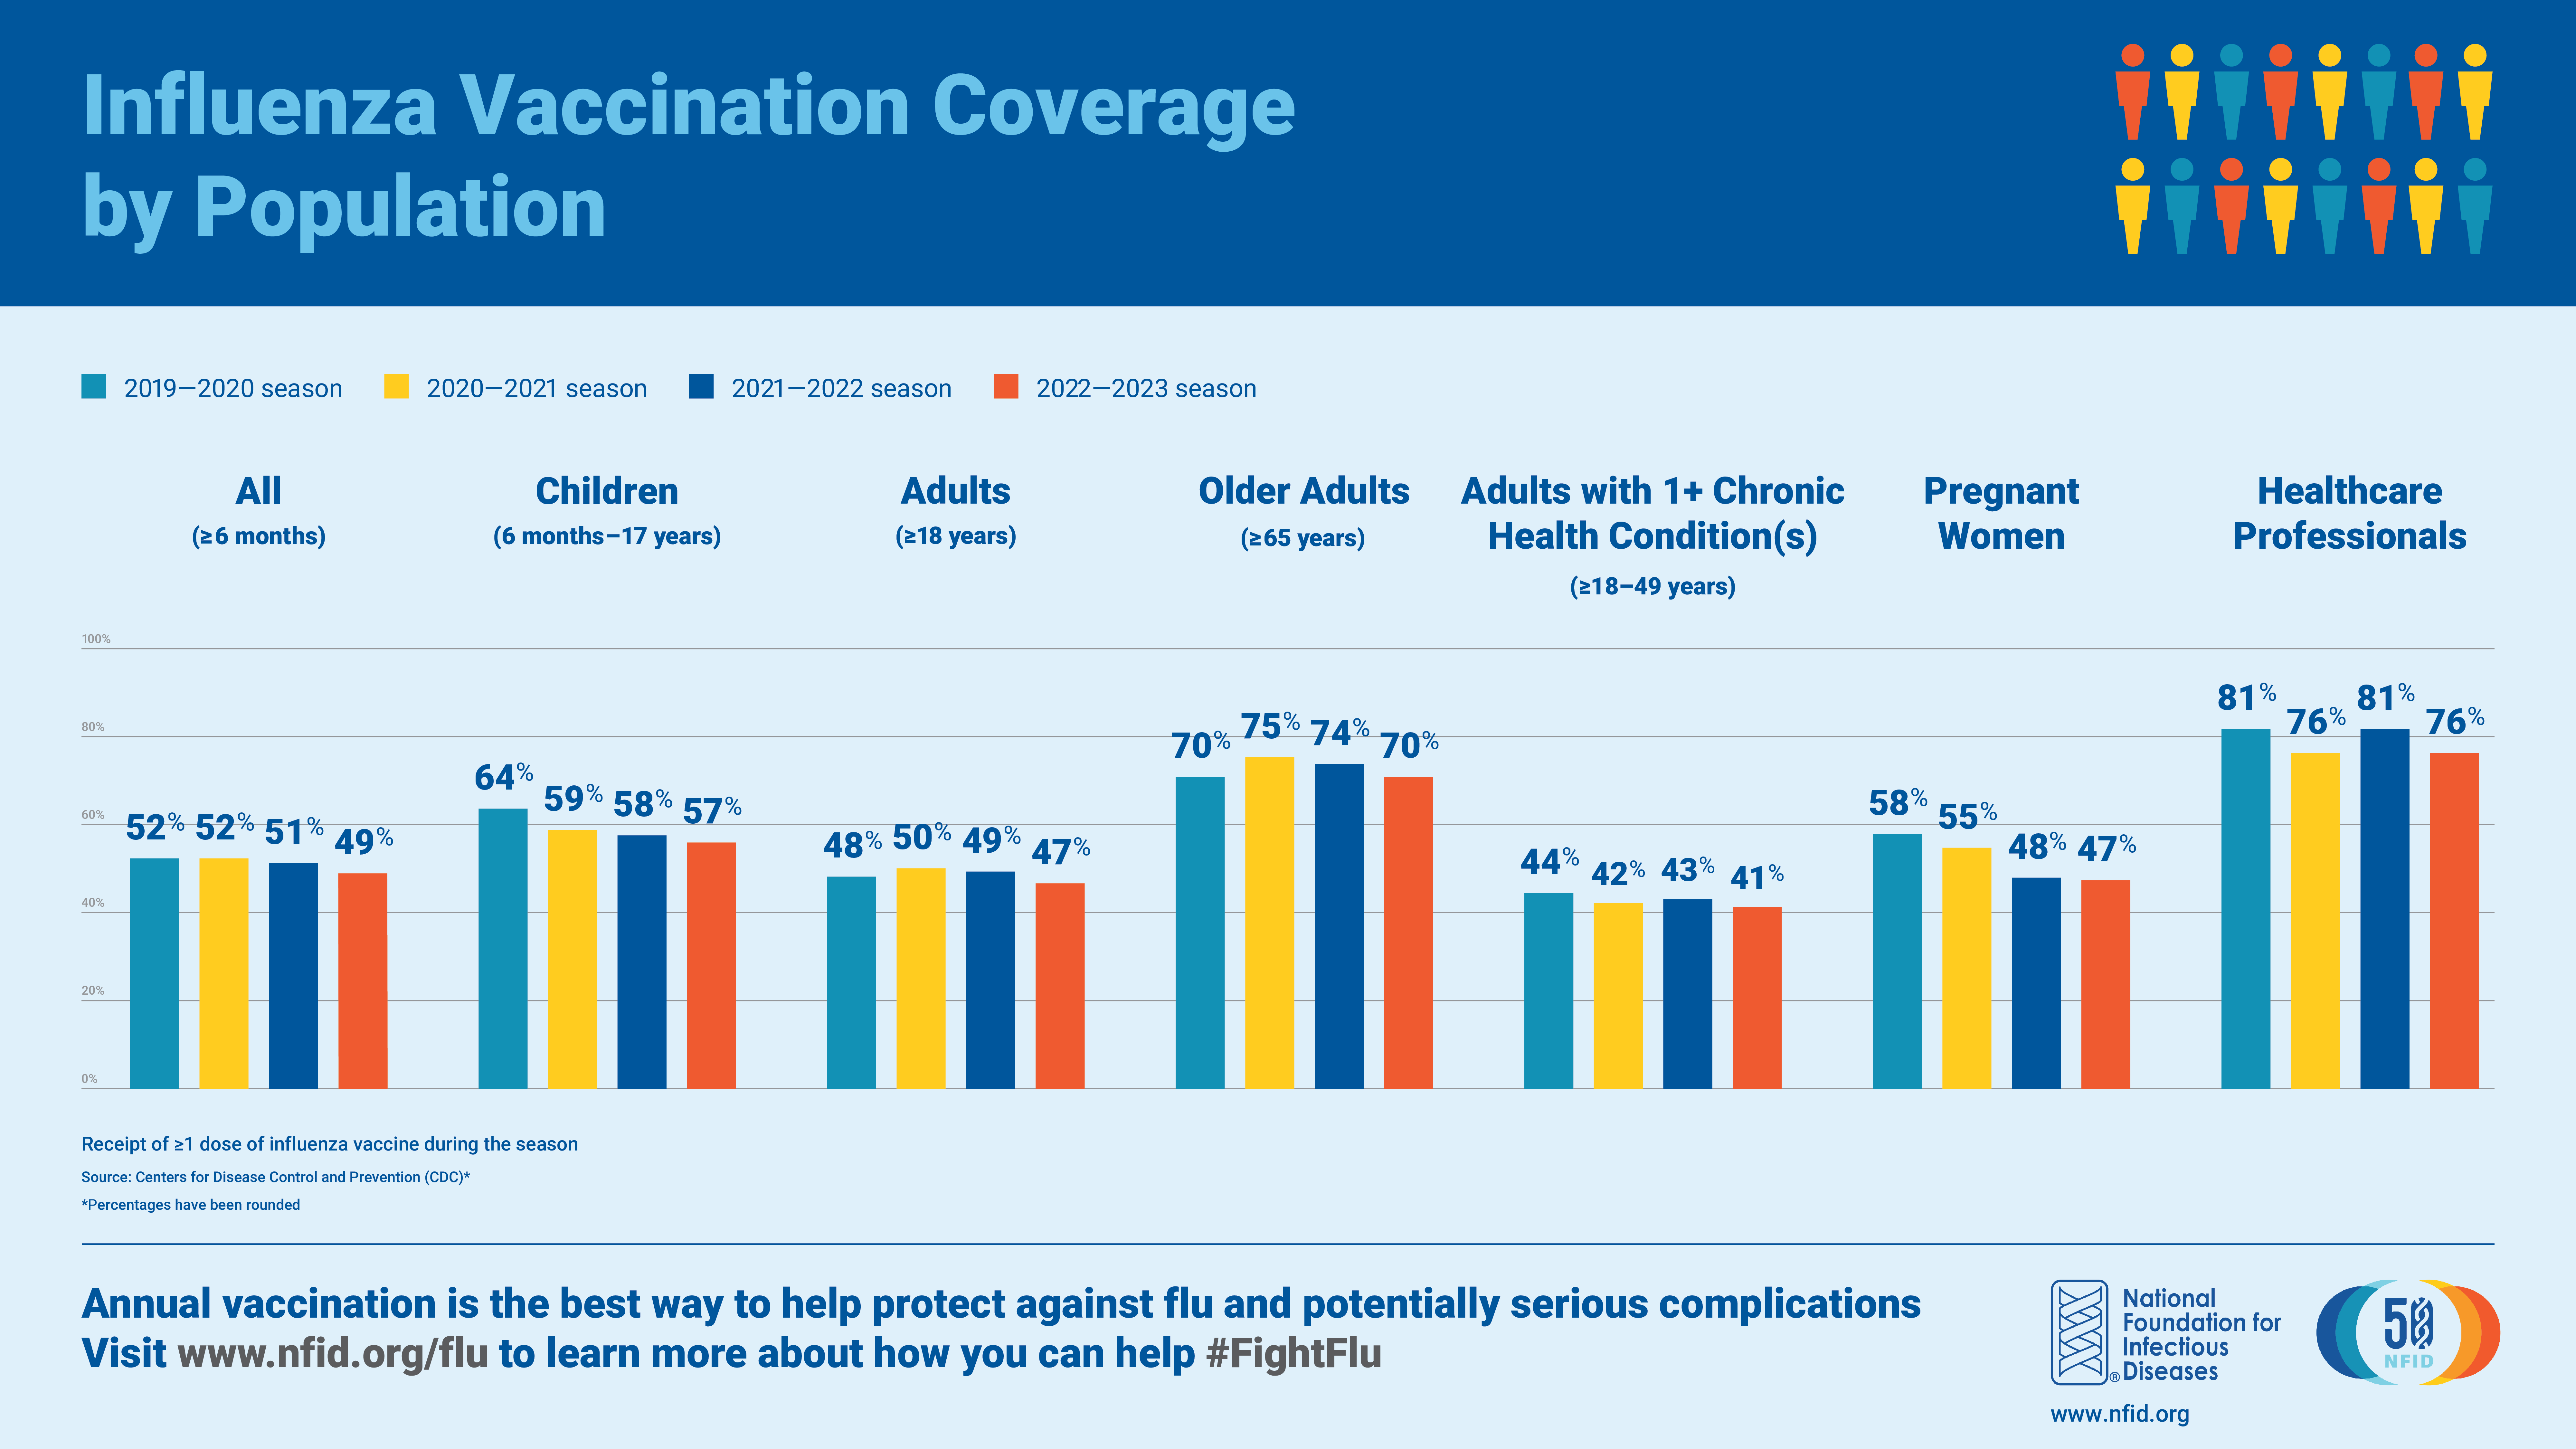 a bar chart with the percentage of vaccinations per year for various groups